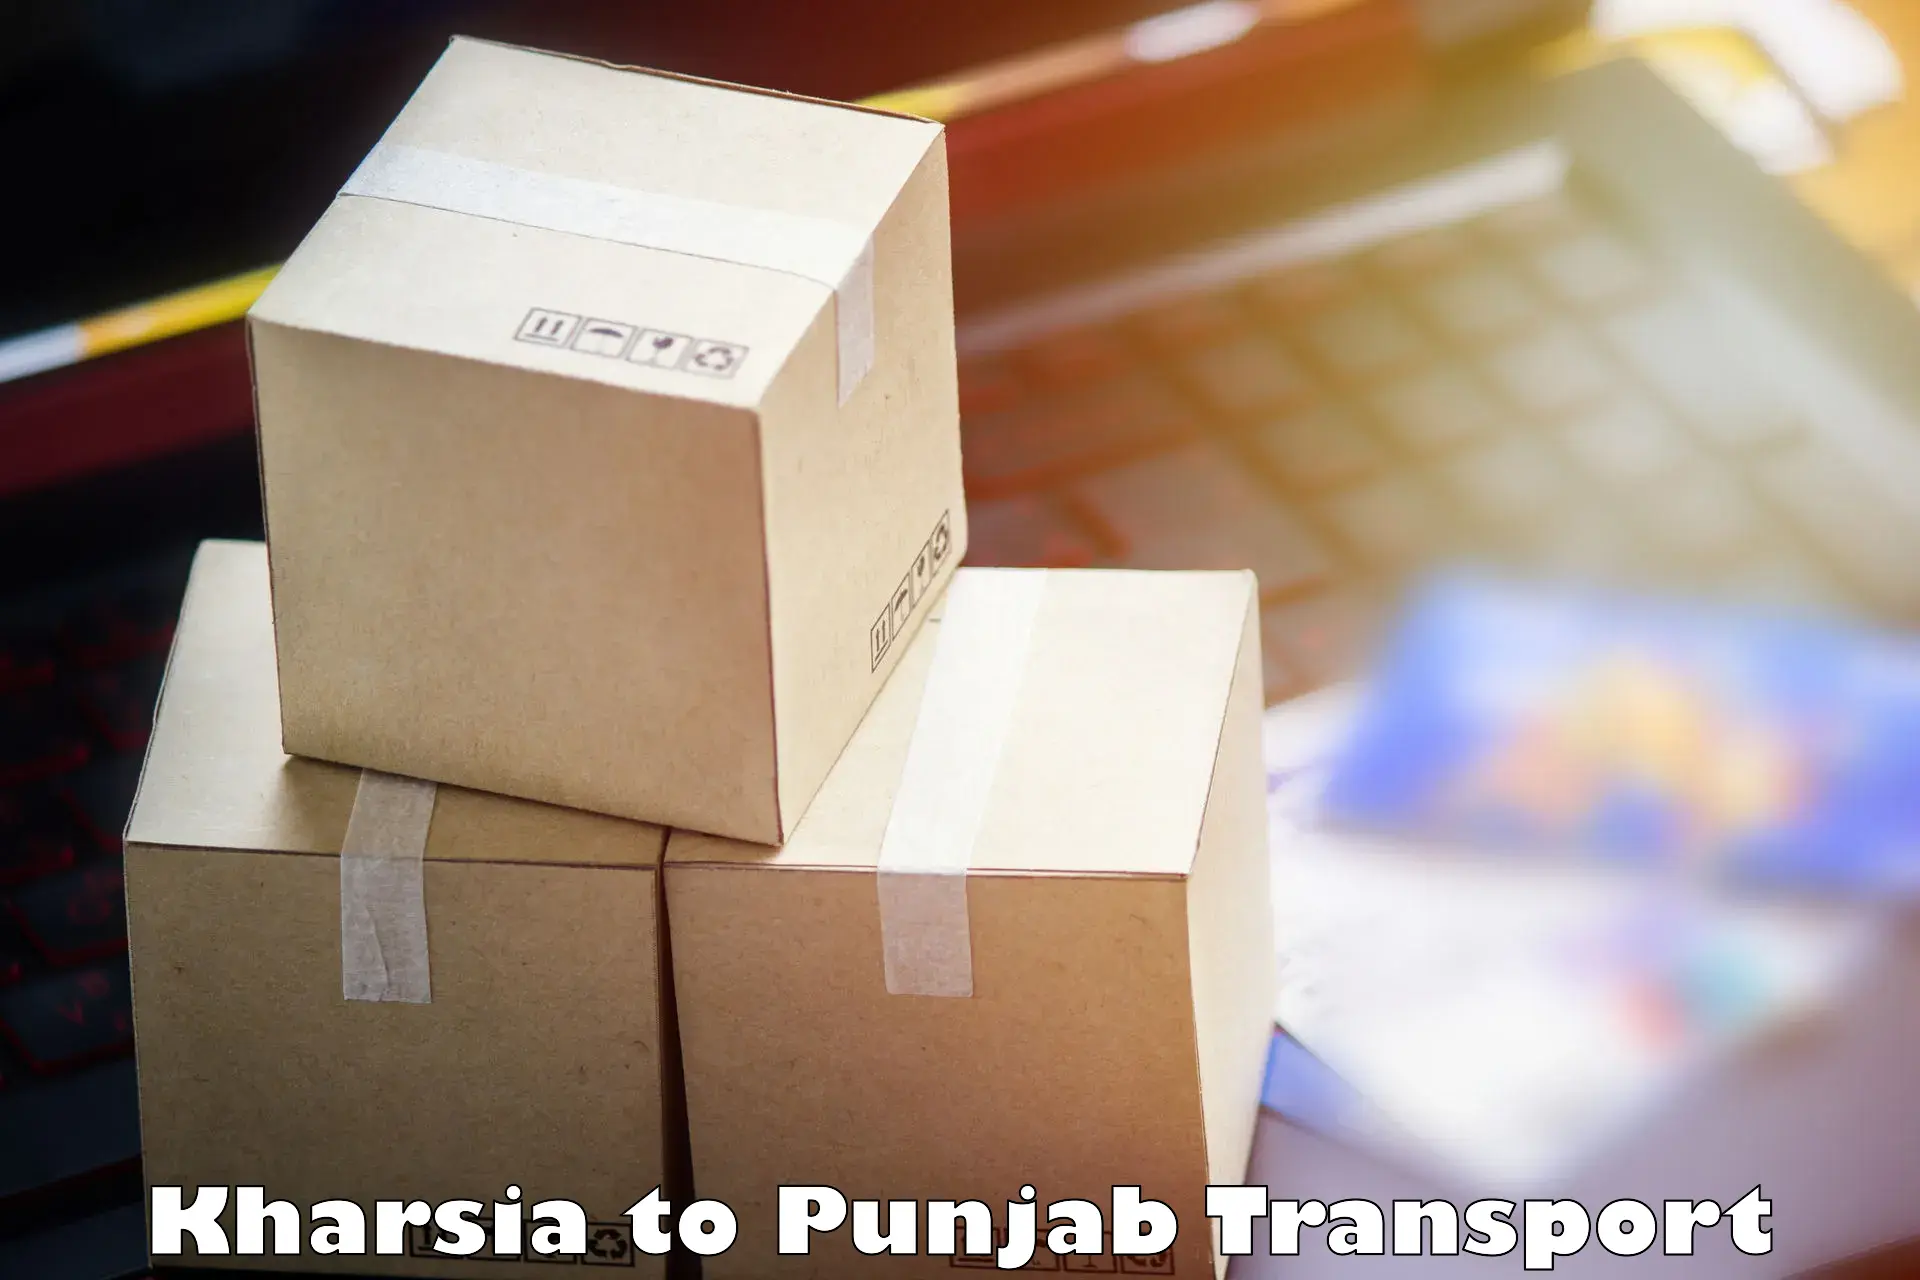 Commercial transport service Kharsia to Amritsar